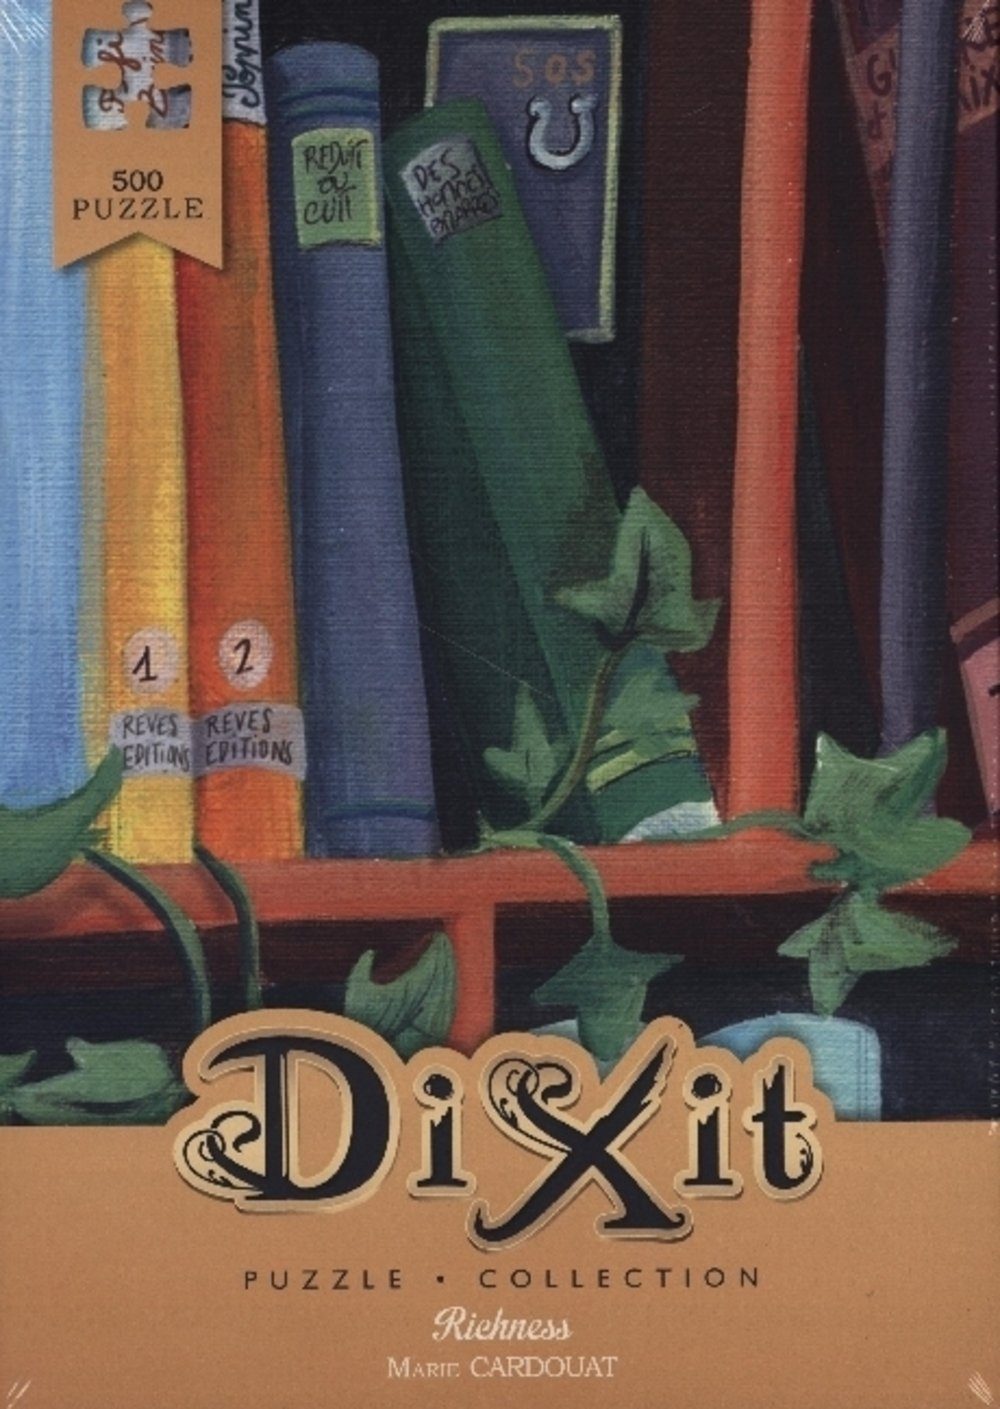 Asmodee Puzzle Richness, Dixit Puzzle-Collection Puzzleteile 500